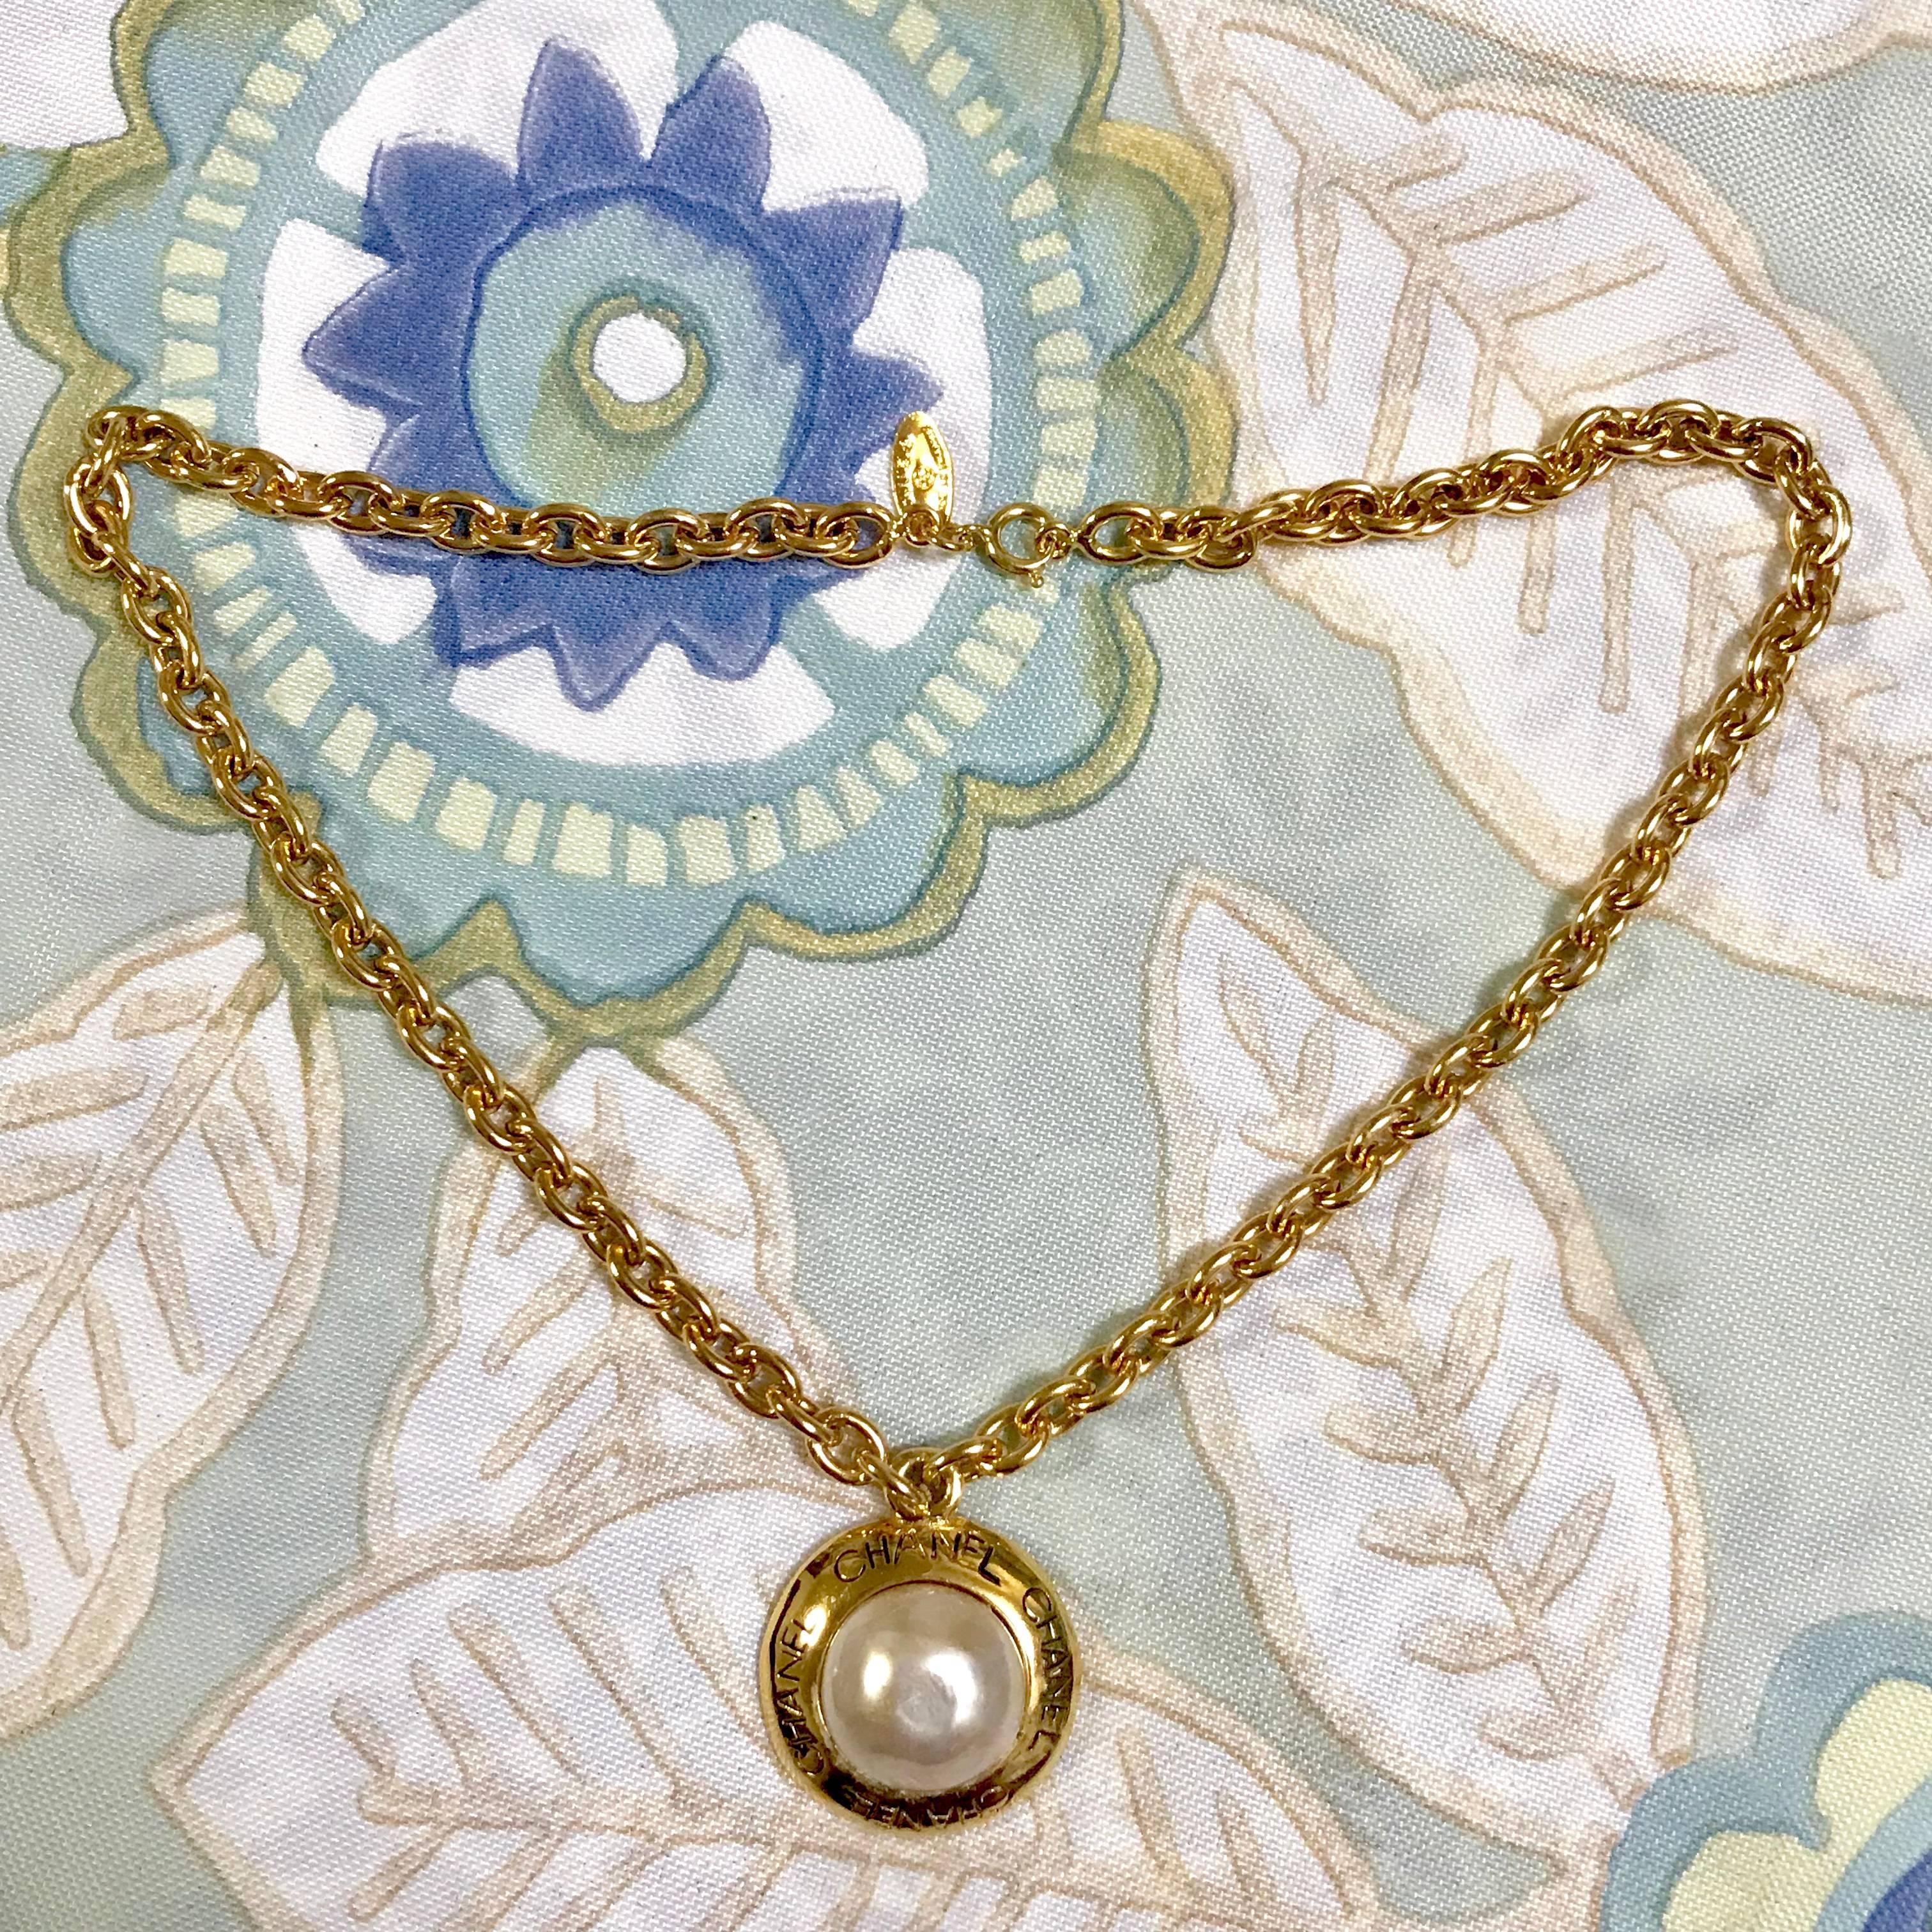 1980s. Vintage CHANEL golden chain necklace with round faux pearl and logo embossed charm pendant top. Classic Chanel jewelry from 80's. Beautiful piece.

Fun, chic and Gorgeous!  
Great gift idea. Free gift wrapping. 
Here is another classic